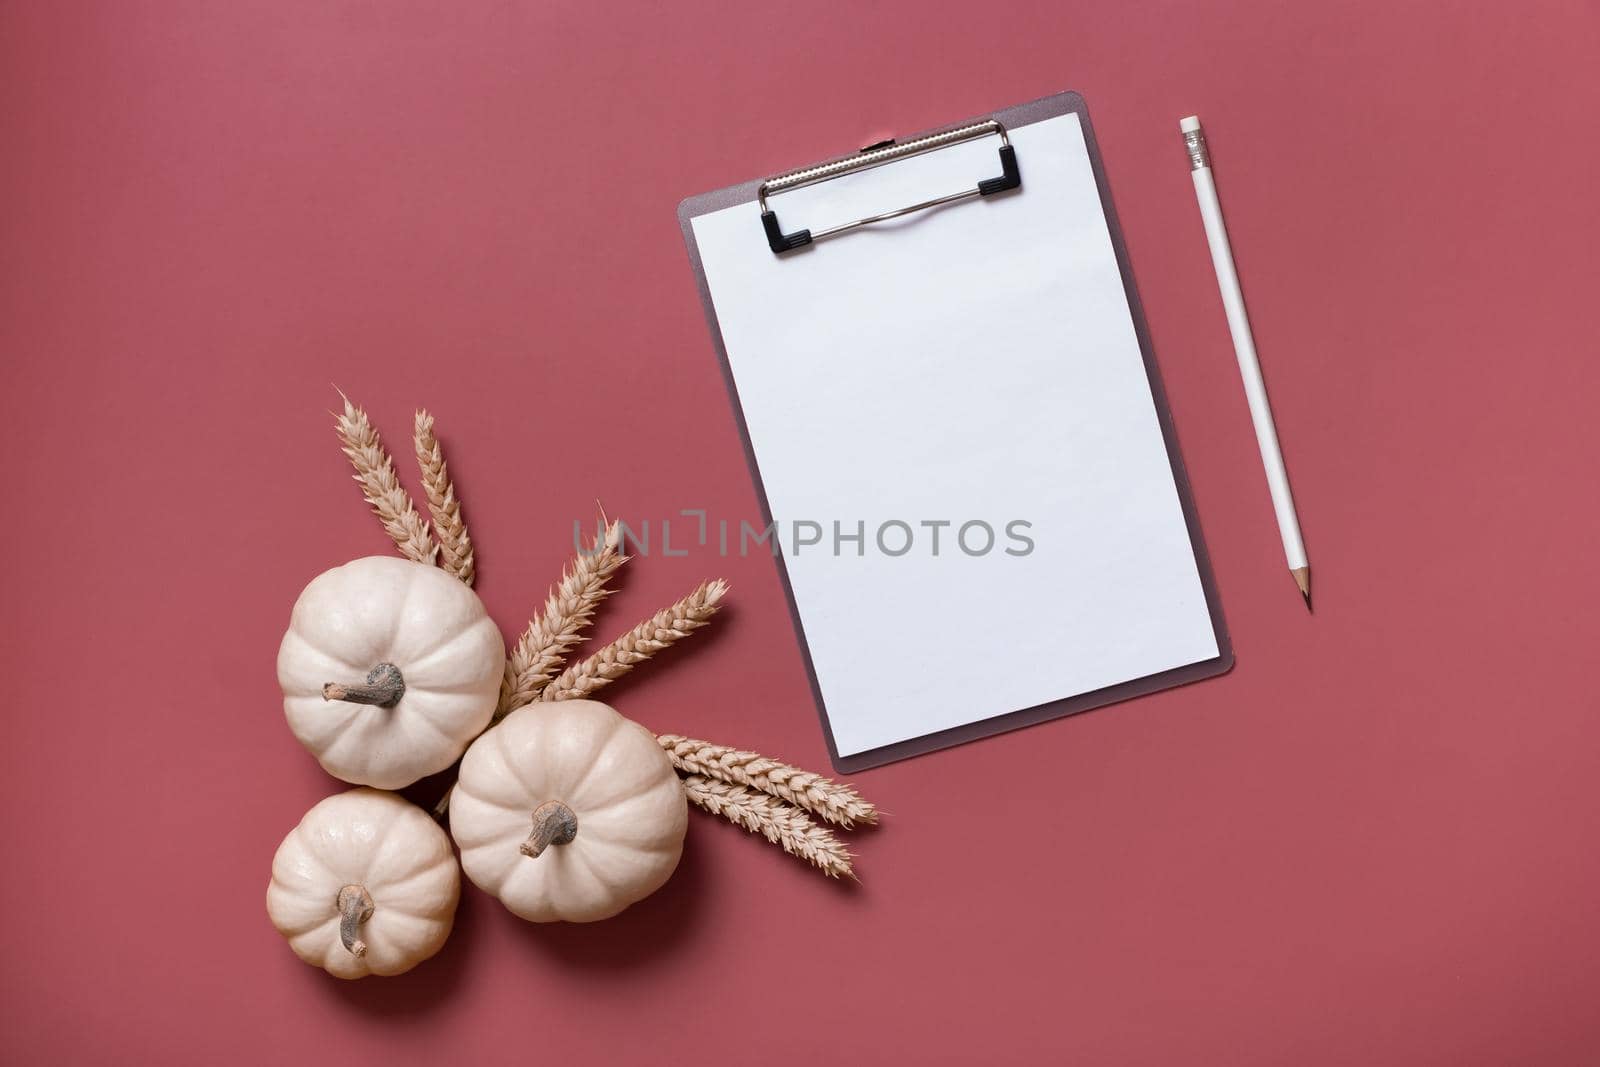 Blank tablet for text next to decorative pumpkins. Autumn theme mockup by ssvimaliss